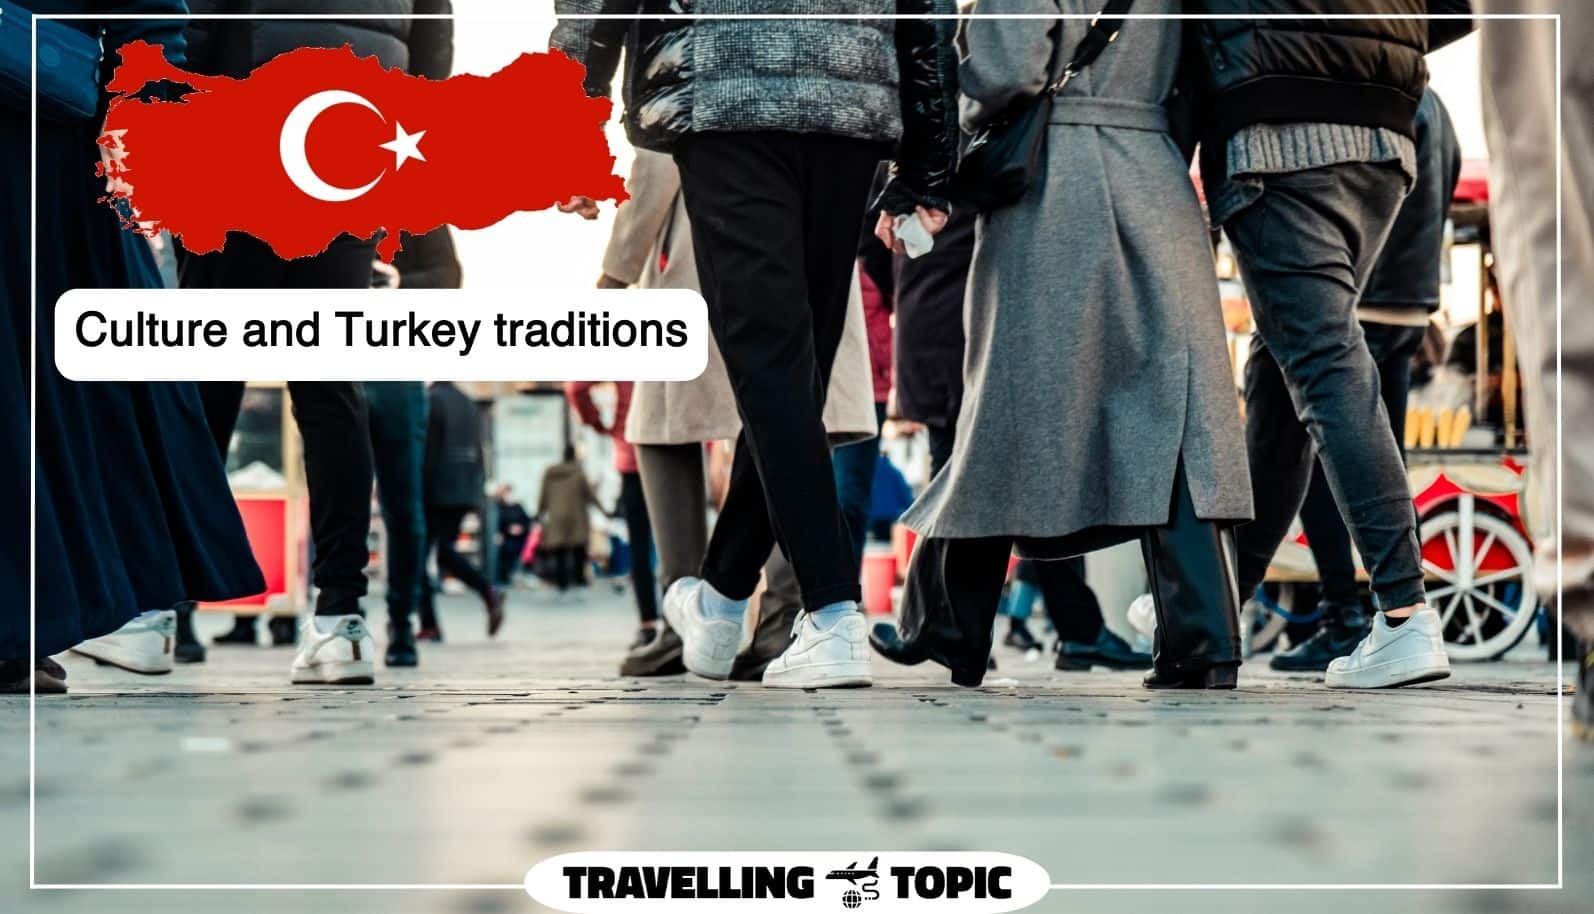 Culture and Turkey traditions